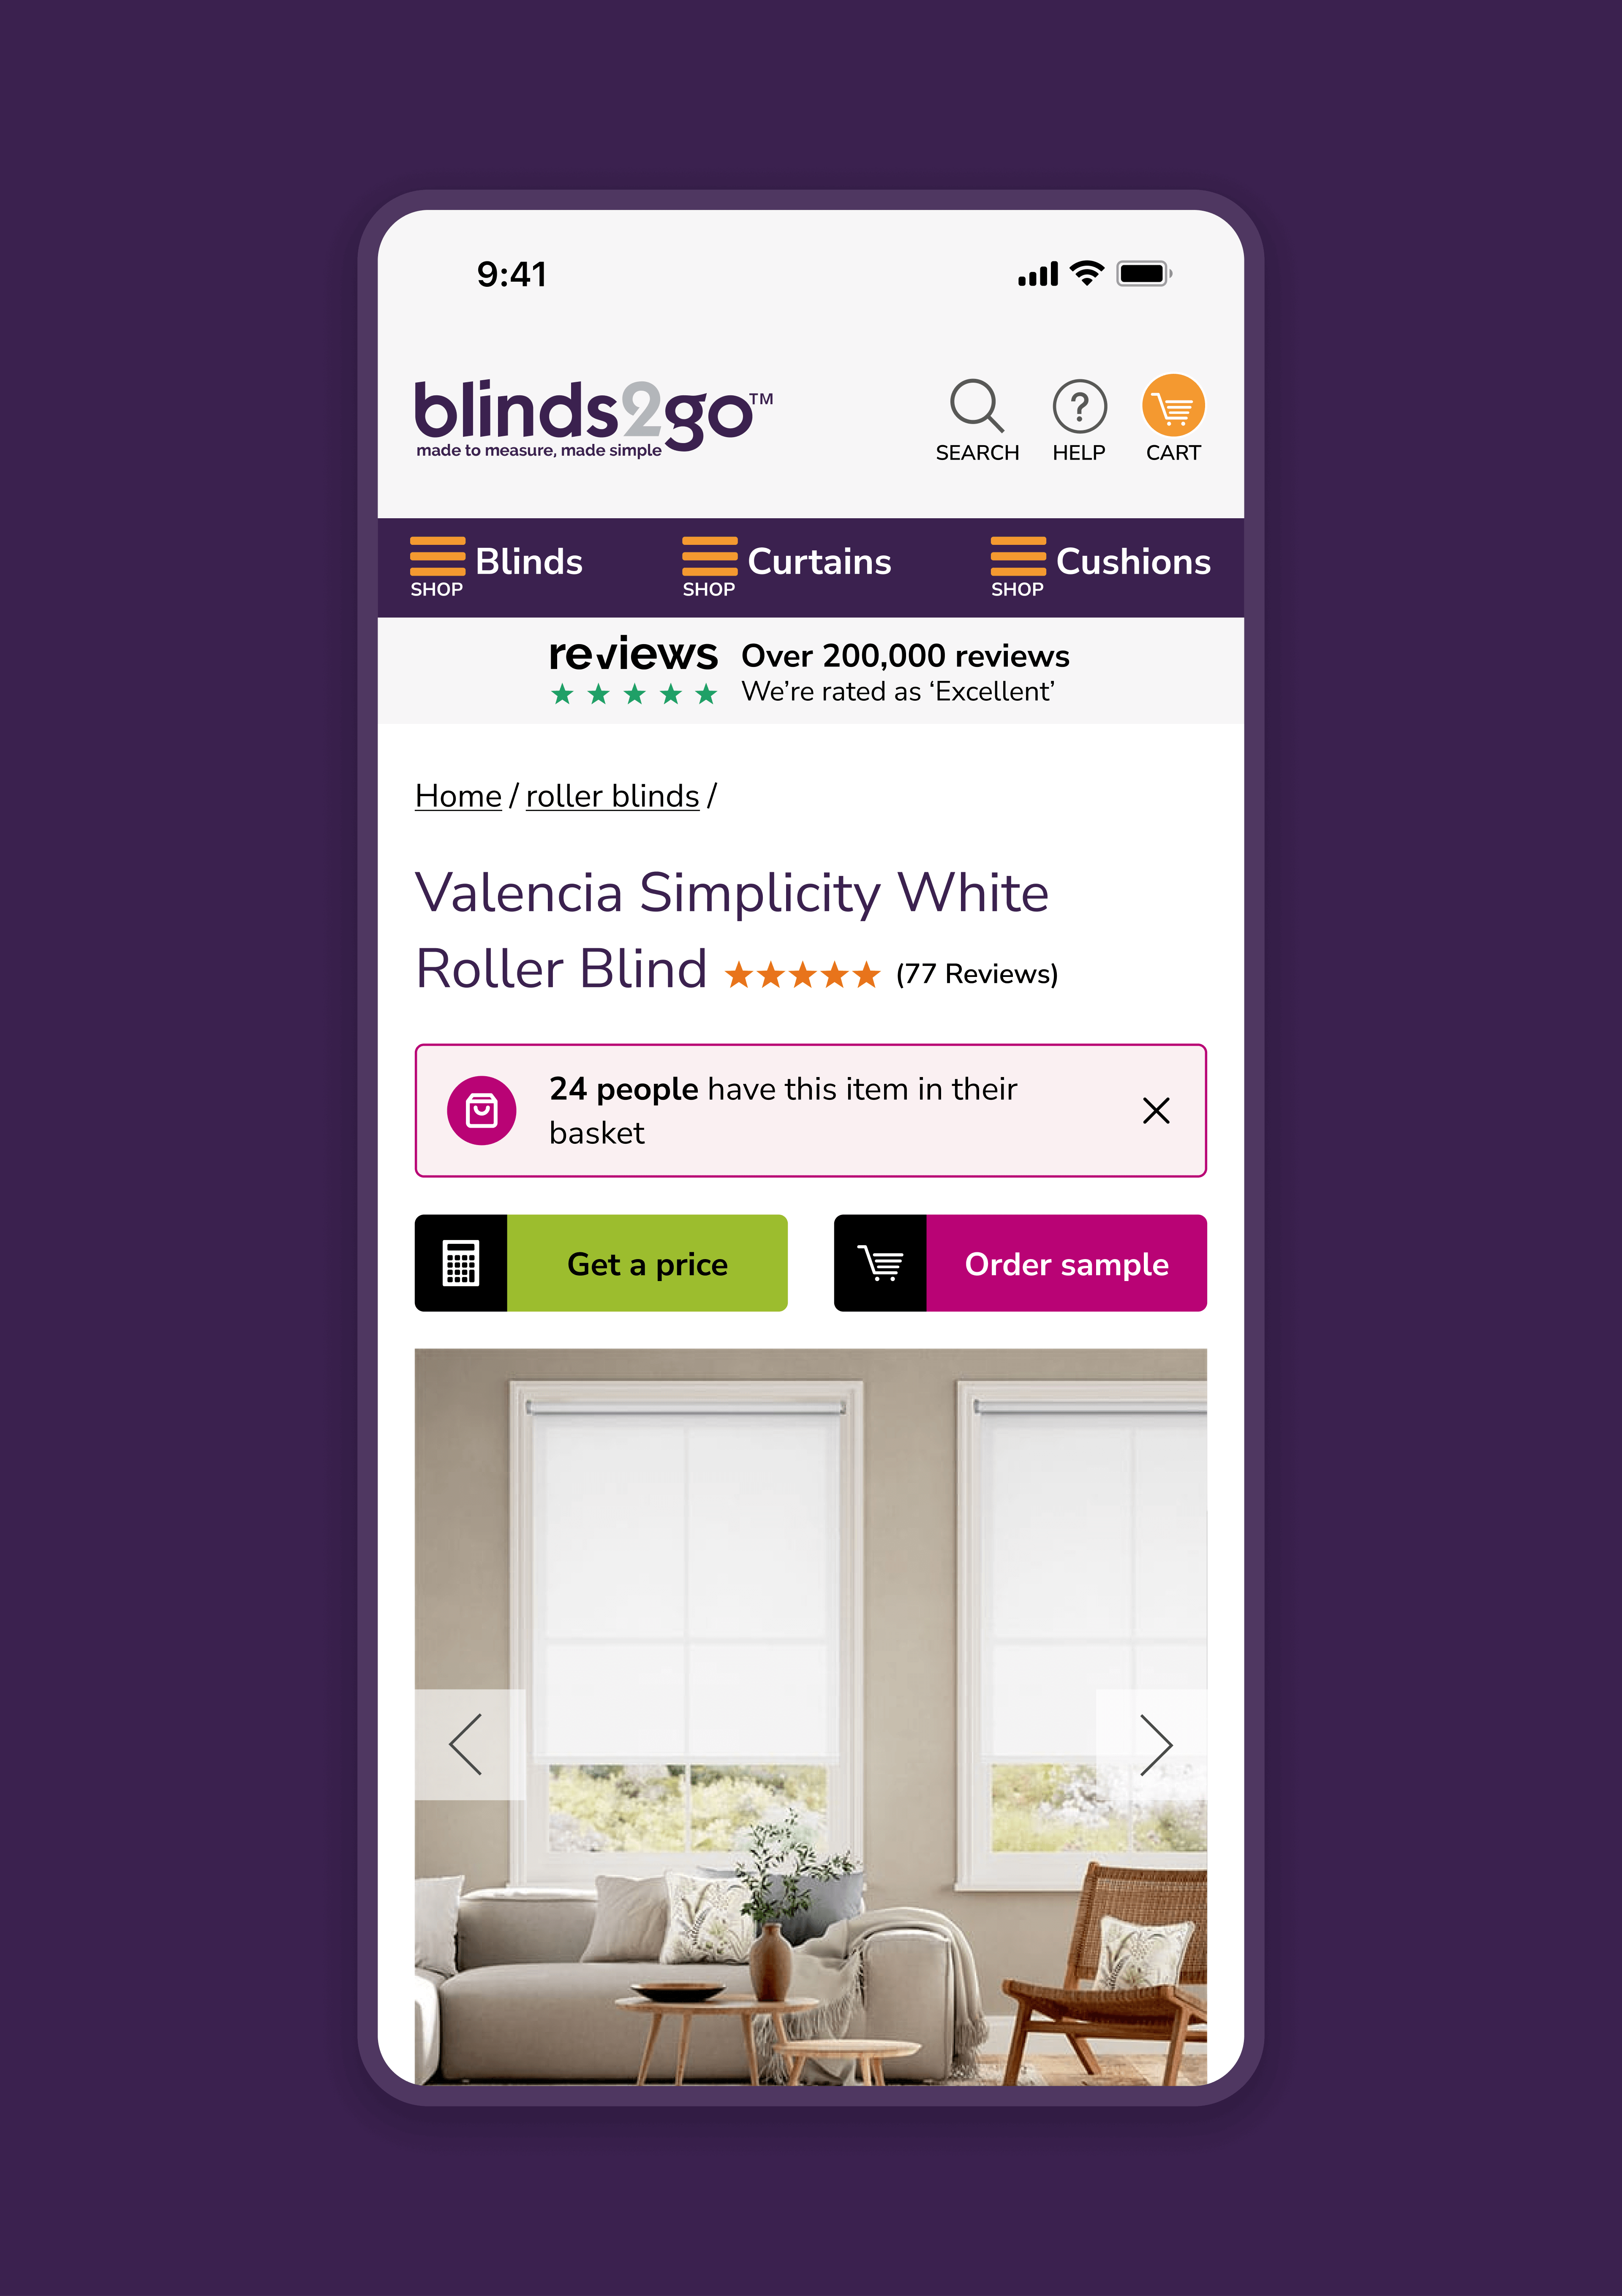 The Blinds2Go mobile product display page shows an urgency message to users